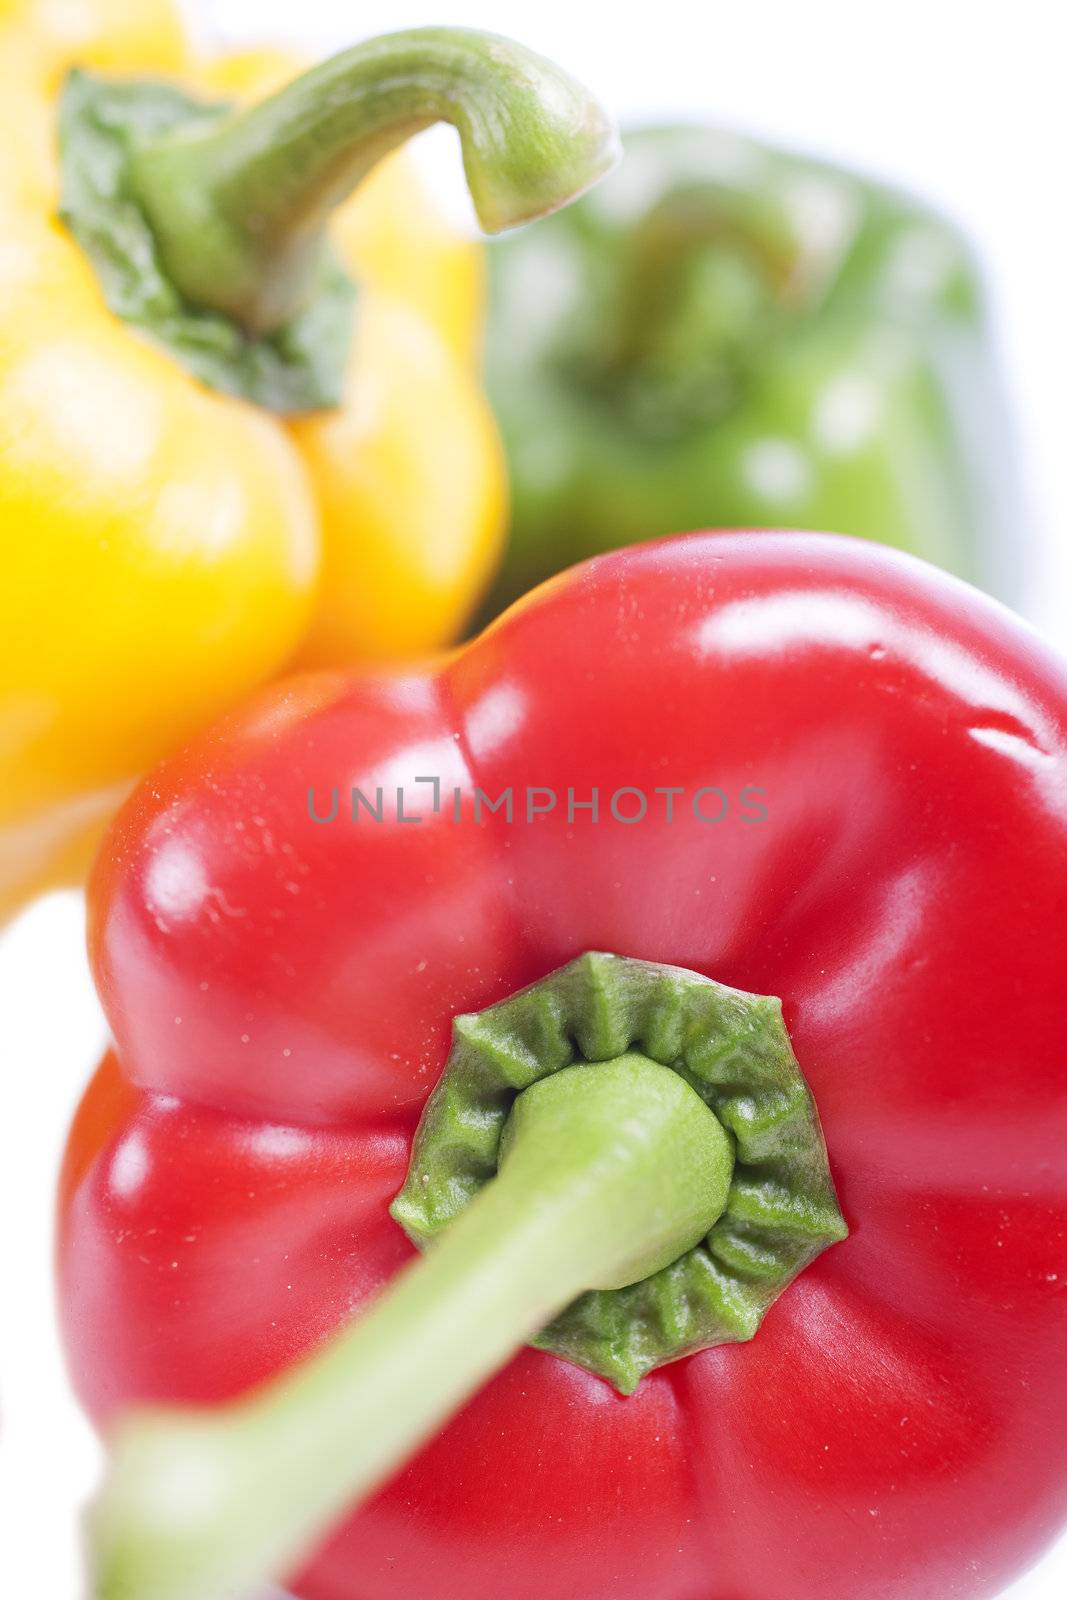 Red Yellow and Green peppers laid out next to each other